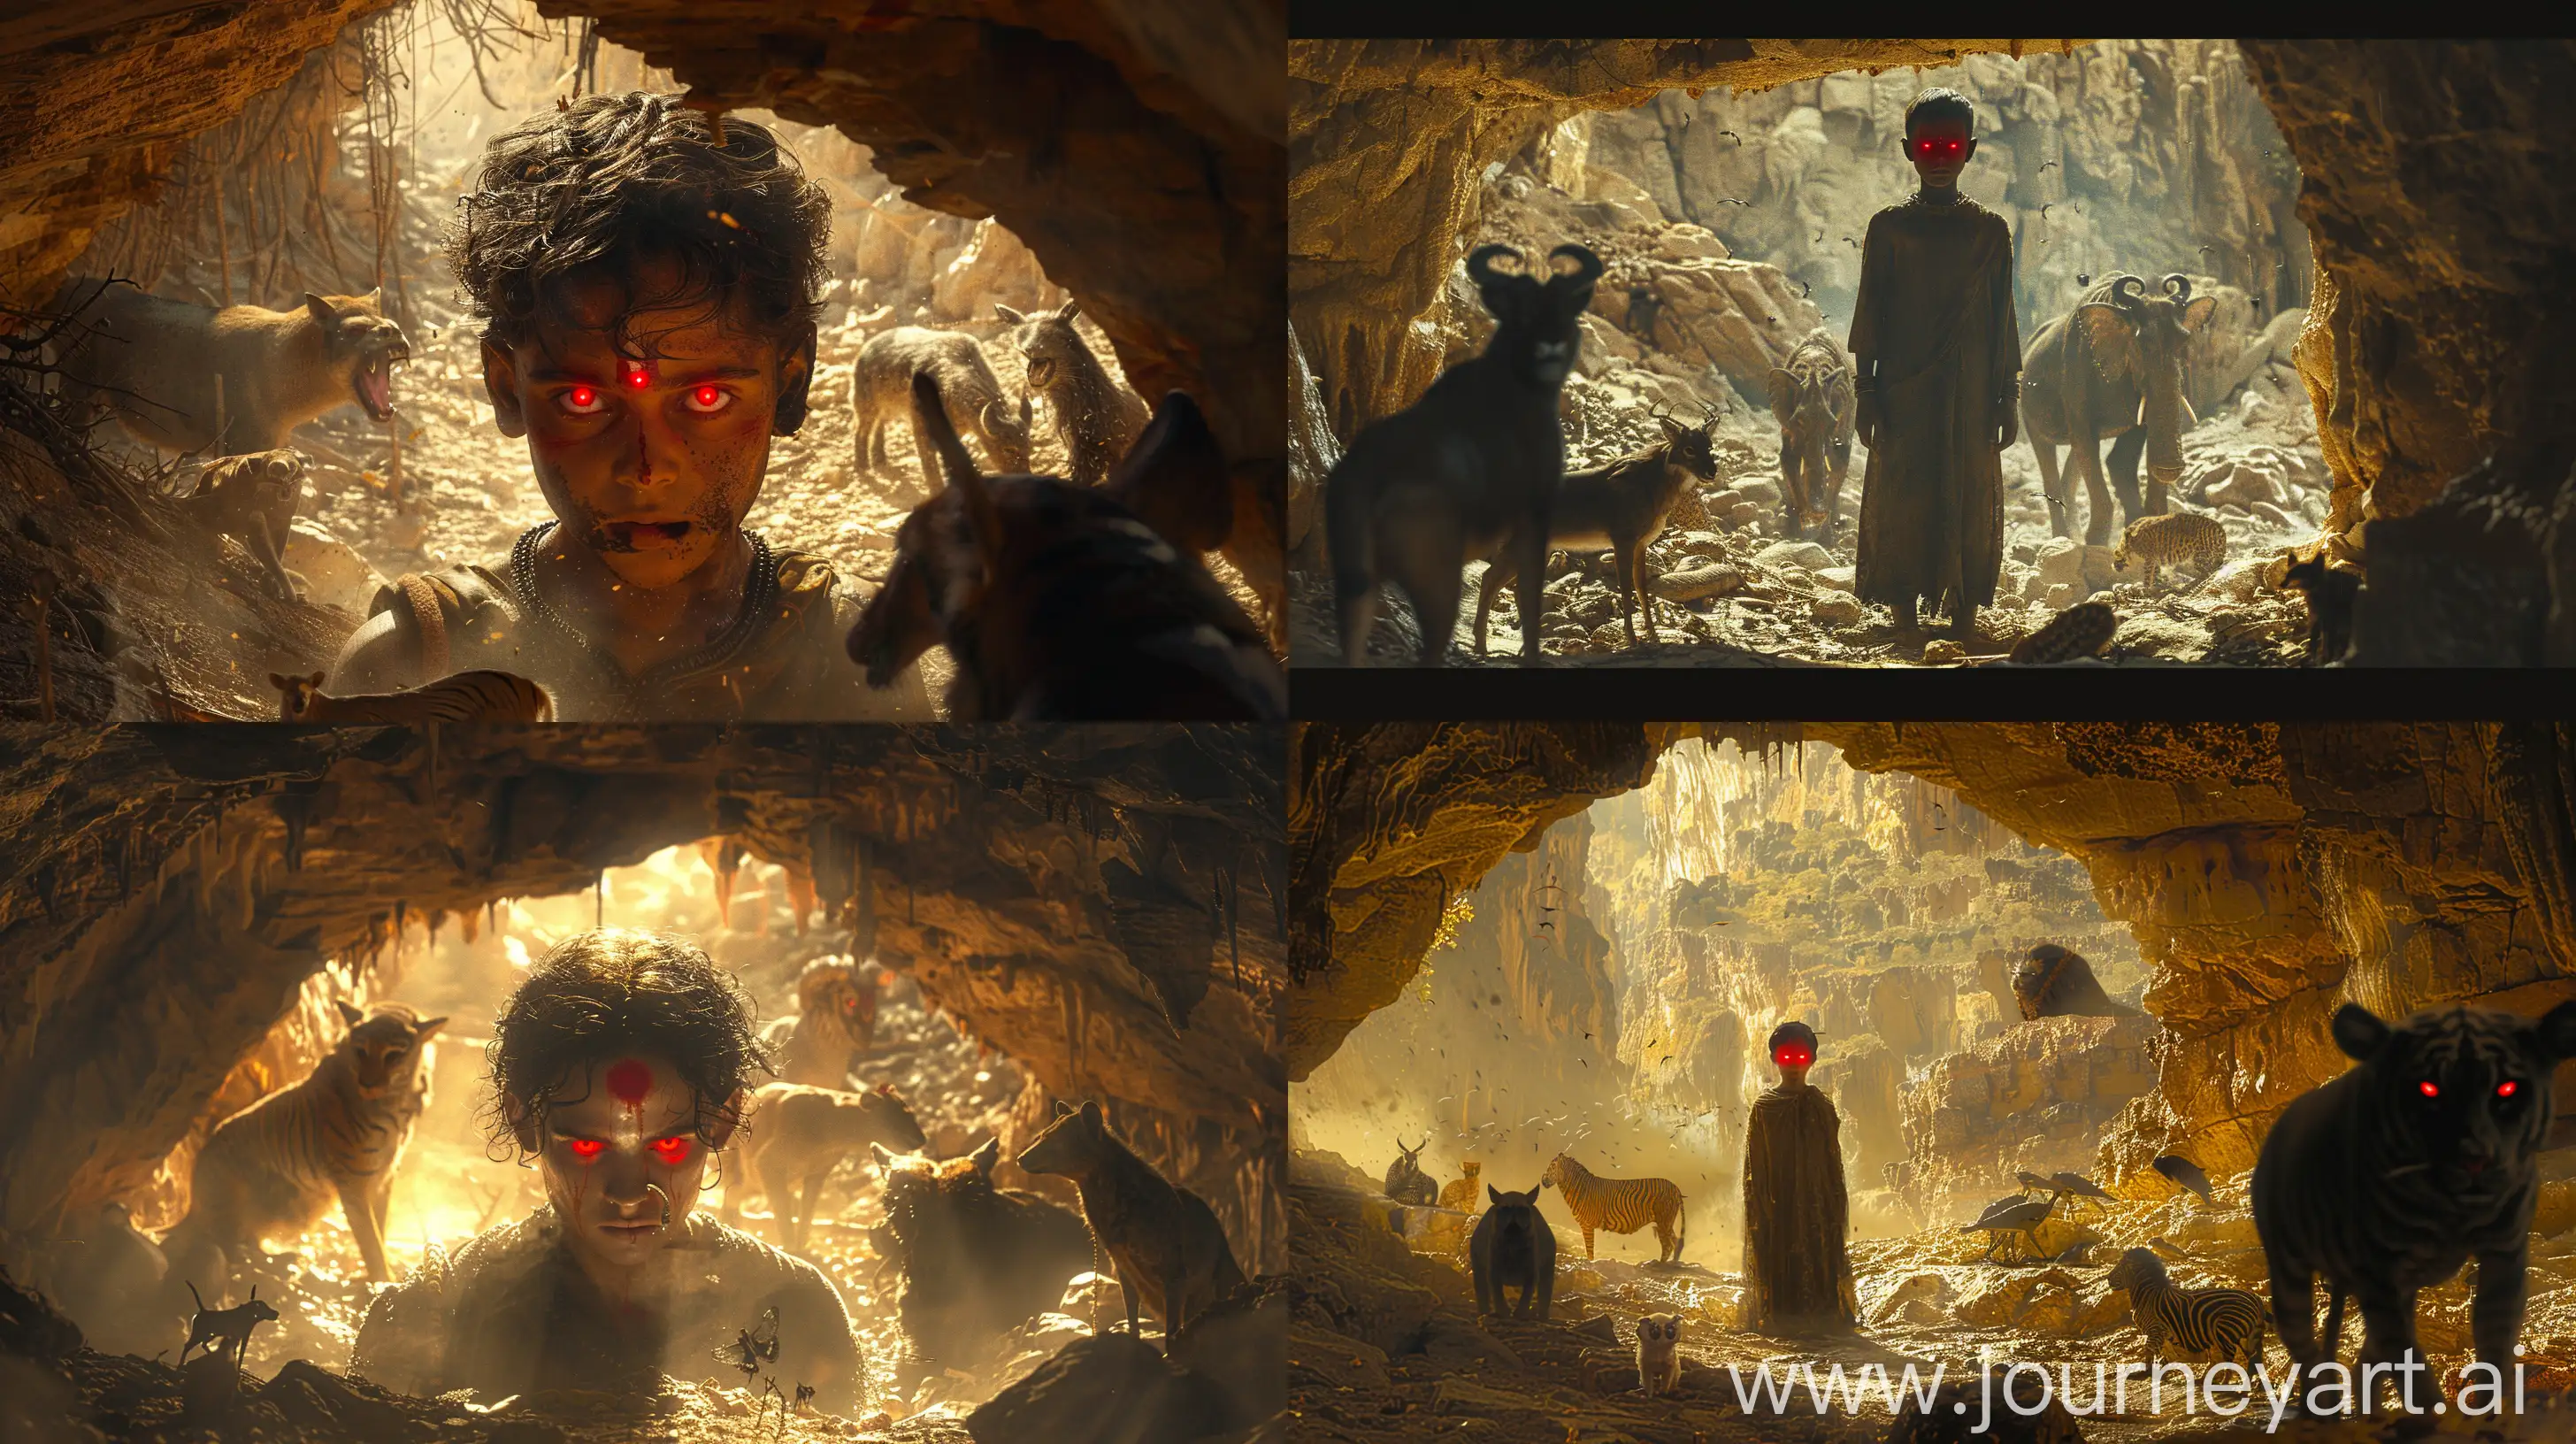 Cinematic, eerie image of a young antagonistic man from Ancient Indian history, situated in a gloom-ridden cave; his red eyes, standing facing the camera, meticulously-detailed, gleaming ominously in sparse, dim lighting. Wildlife cohabits the cave around him, creating an ominous ambience. Wishing for intricate detailing in high-resolution --s 400 --ar 16:9 --v 6